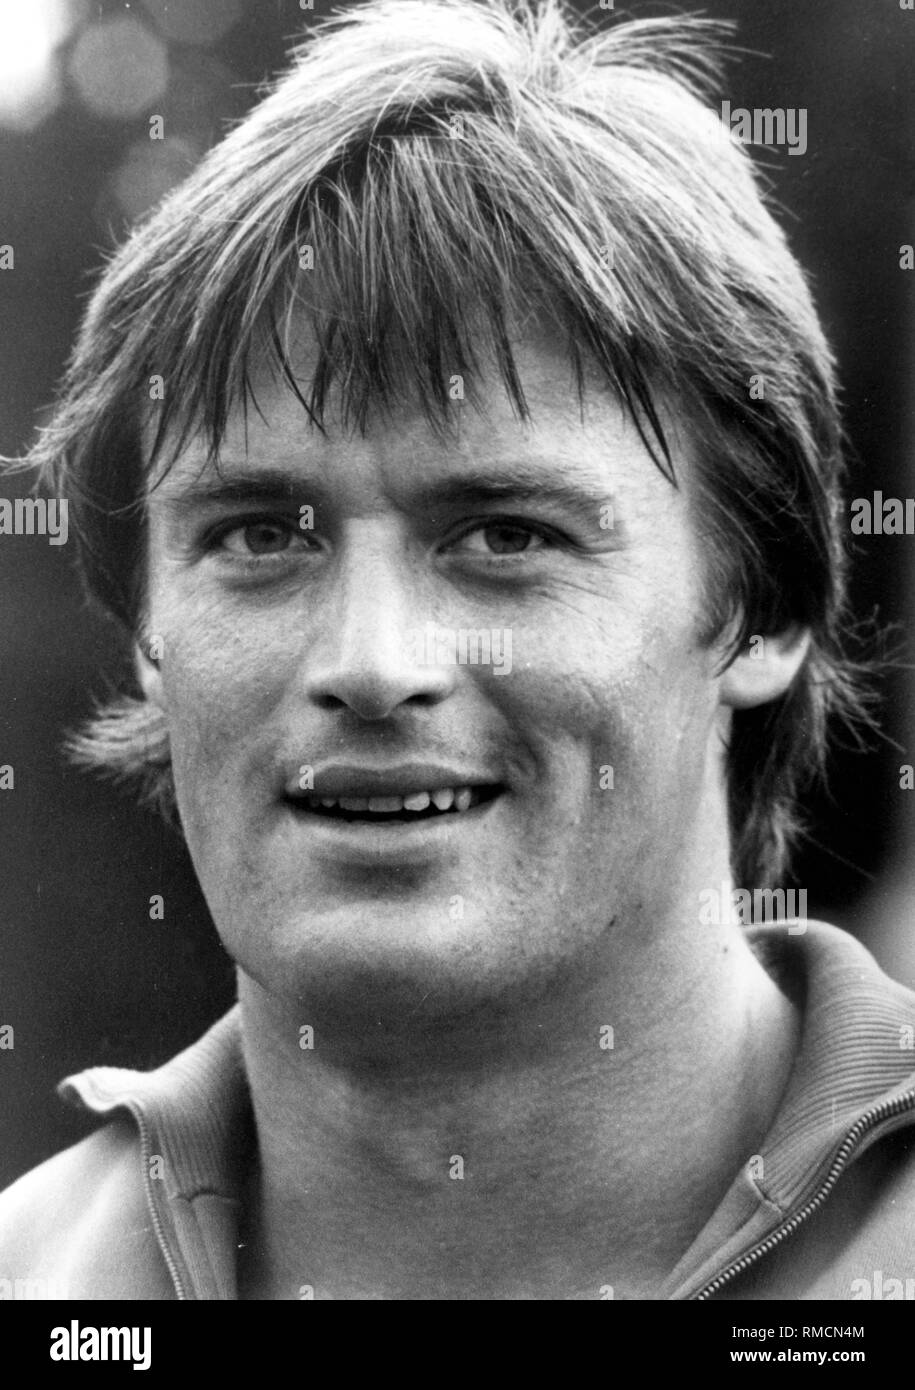 Wolfgang Schmidt - * 16.01.1954. East German athlete, discus thrower, silver medalist in discus throwing at the Olympics 1976 in Montreal and European champion in 1978. In 1982 after a failed attempt to escape in the GDR, he was sentenced to 16 months imprisonment. End of 1987 emigration to the West. Portrait photo from May 1978. Stock Photo